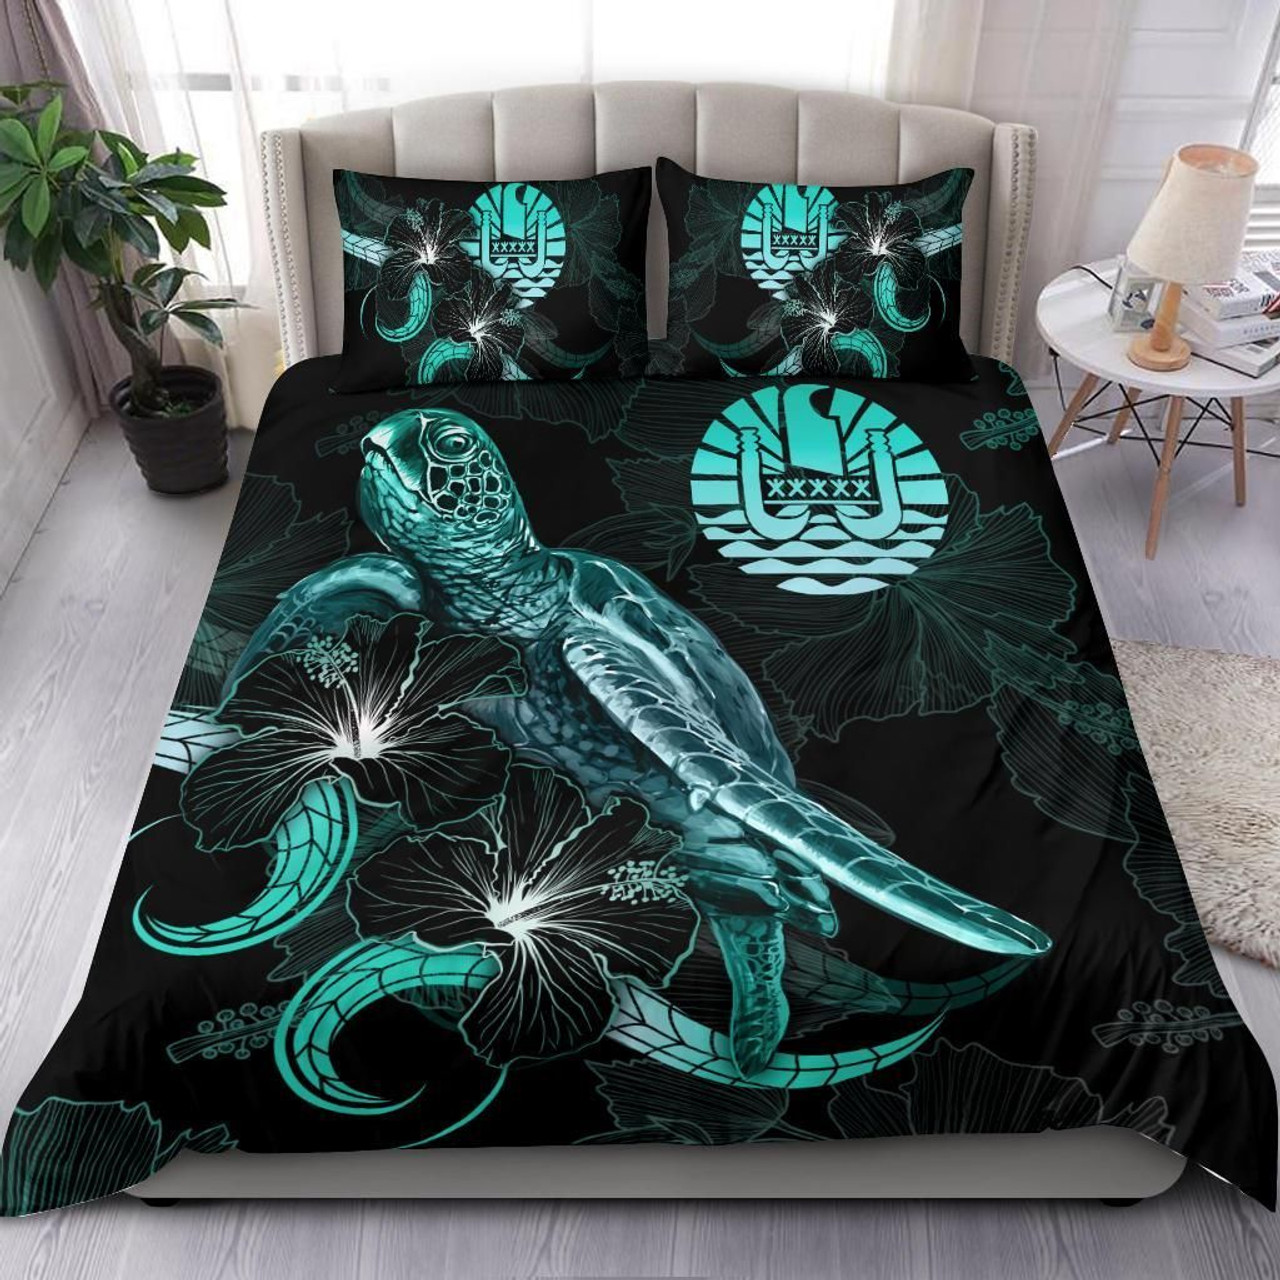 Tahiti Polynesian Bedding Set - Turtle With Blooming Hibiscus Turquoise 1